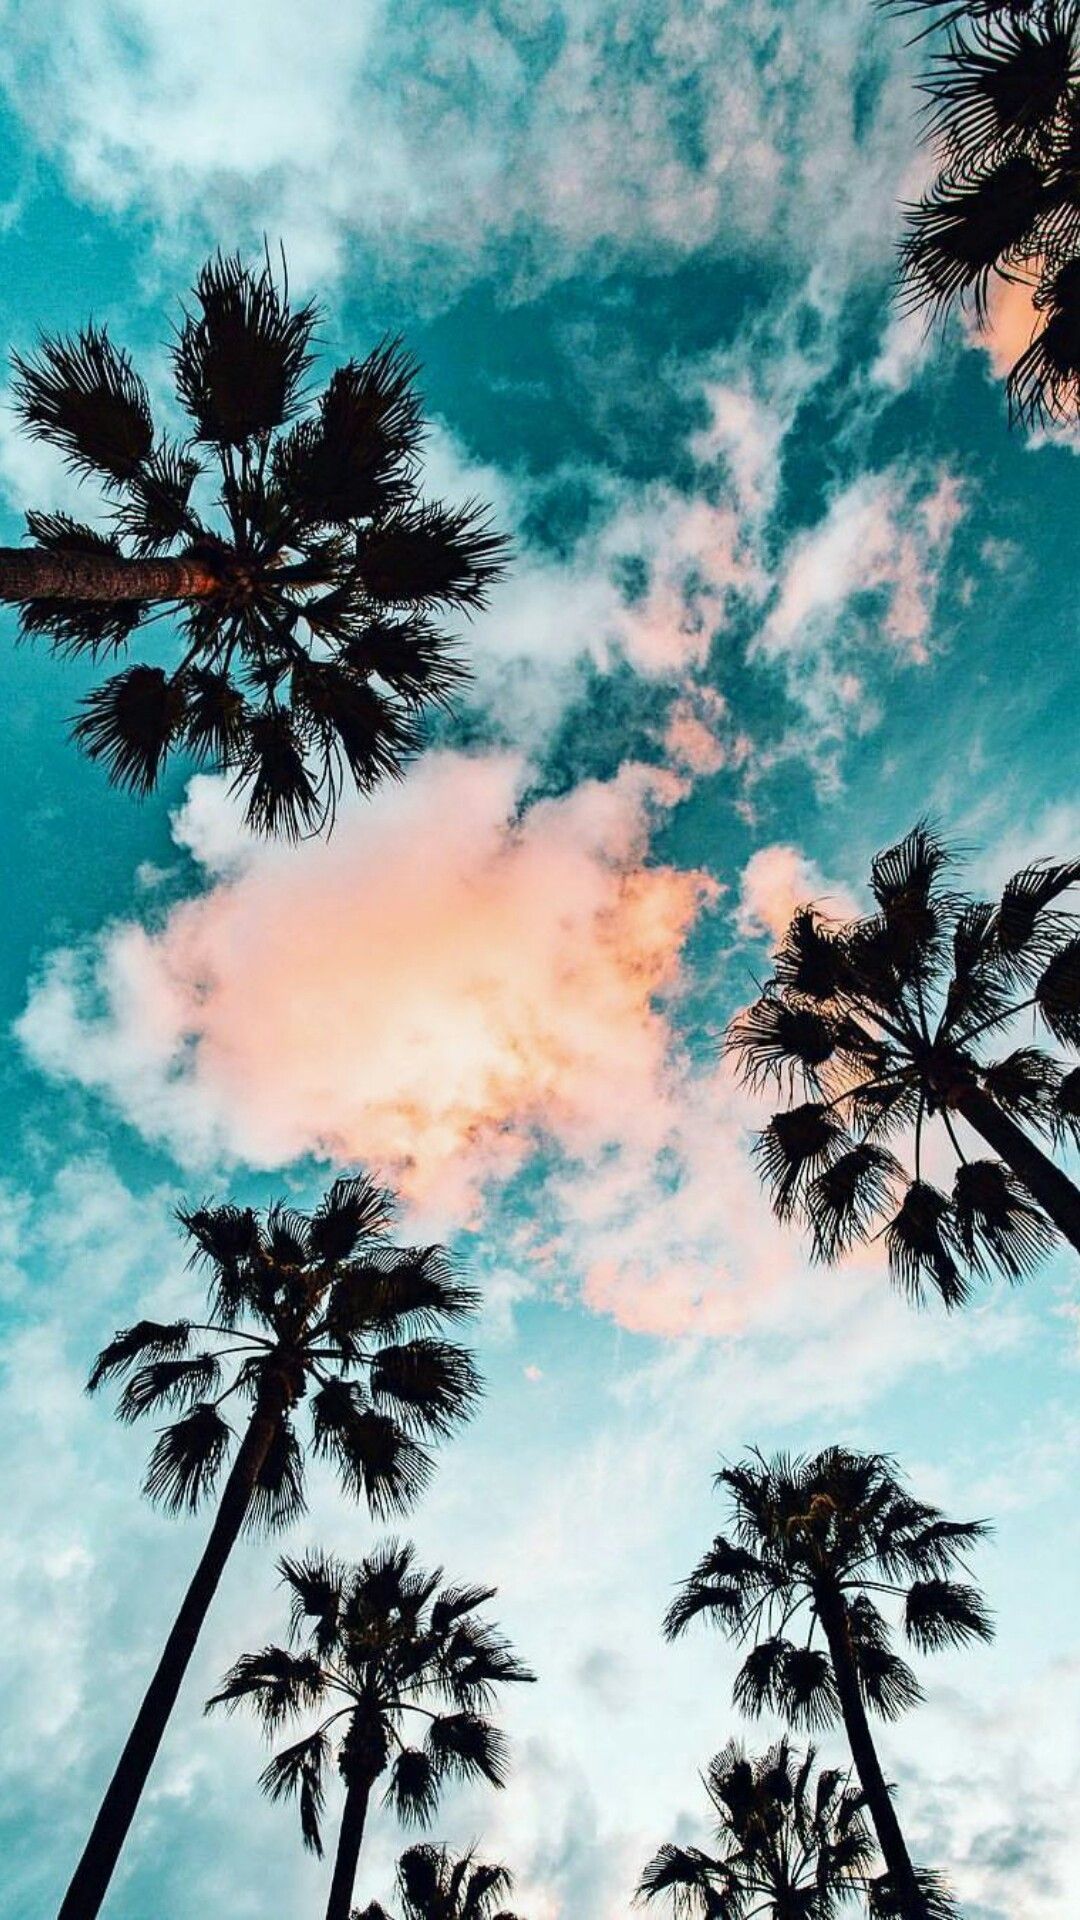 Aesthetic Palm Tree Wallpaper - KoLPaPer - Awesome Free HD Wallpapers